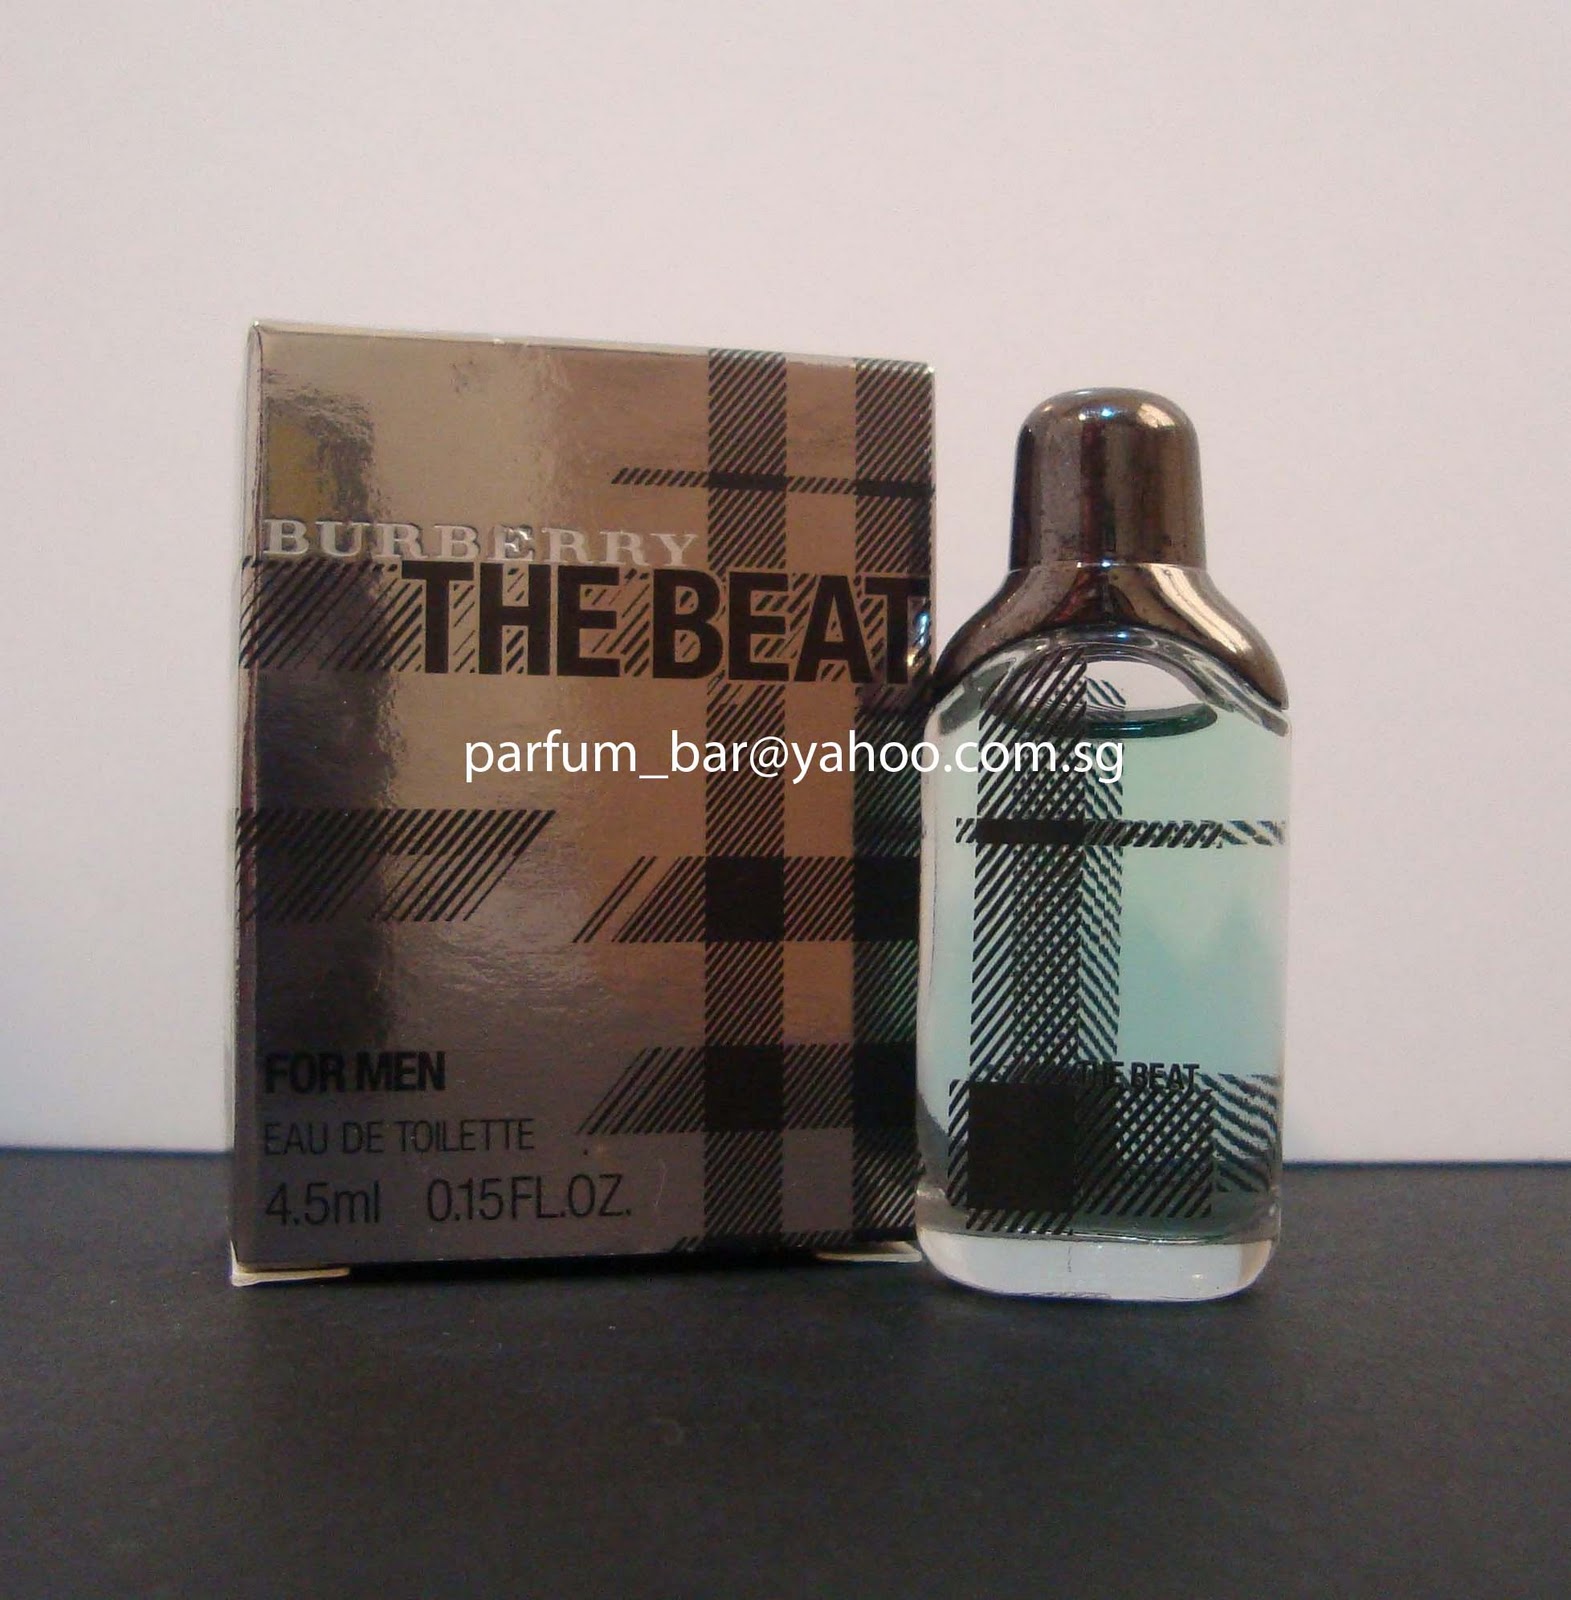 burberry the beat lilly